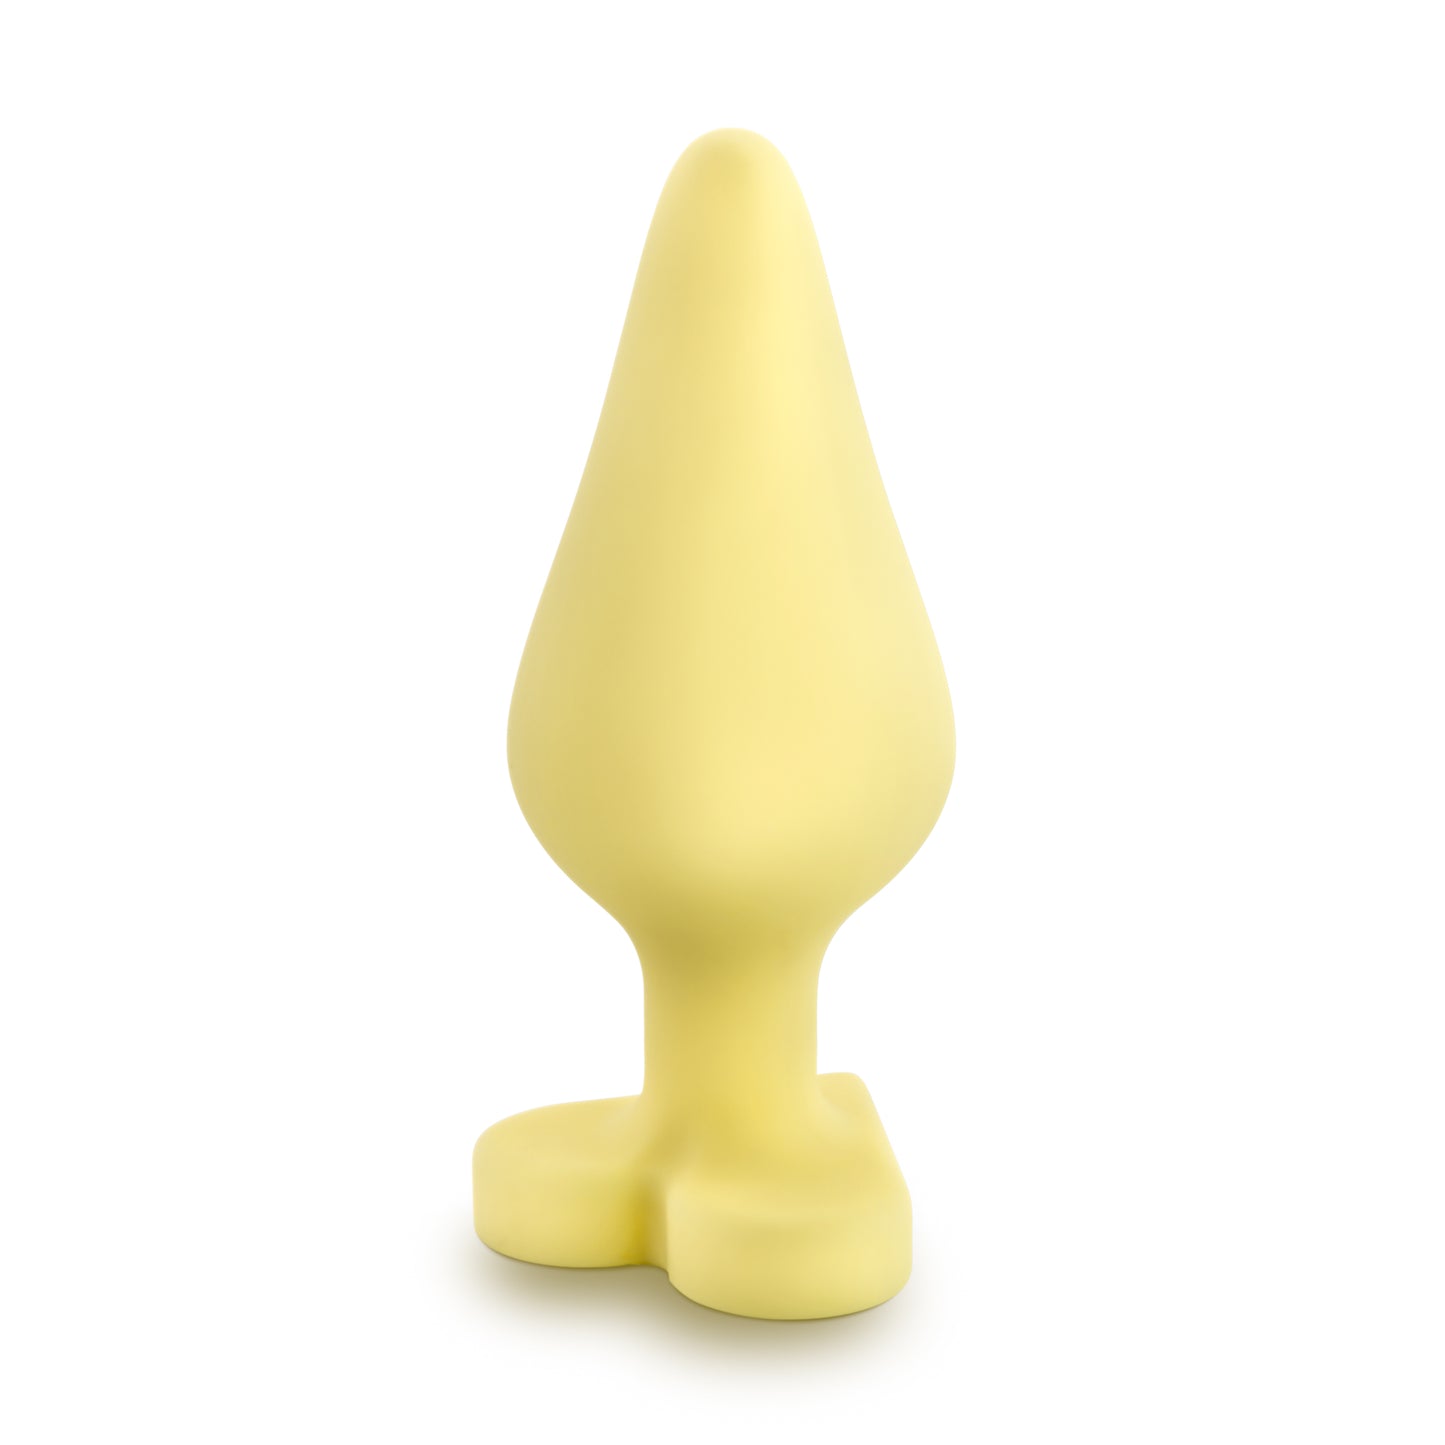 Naughty Candy Heart - Spank Me - Yellow BL-95630